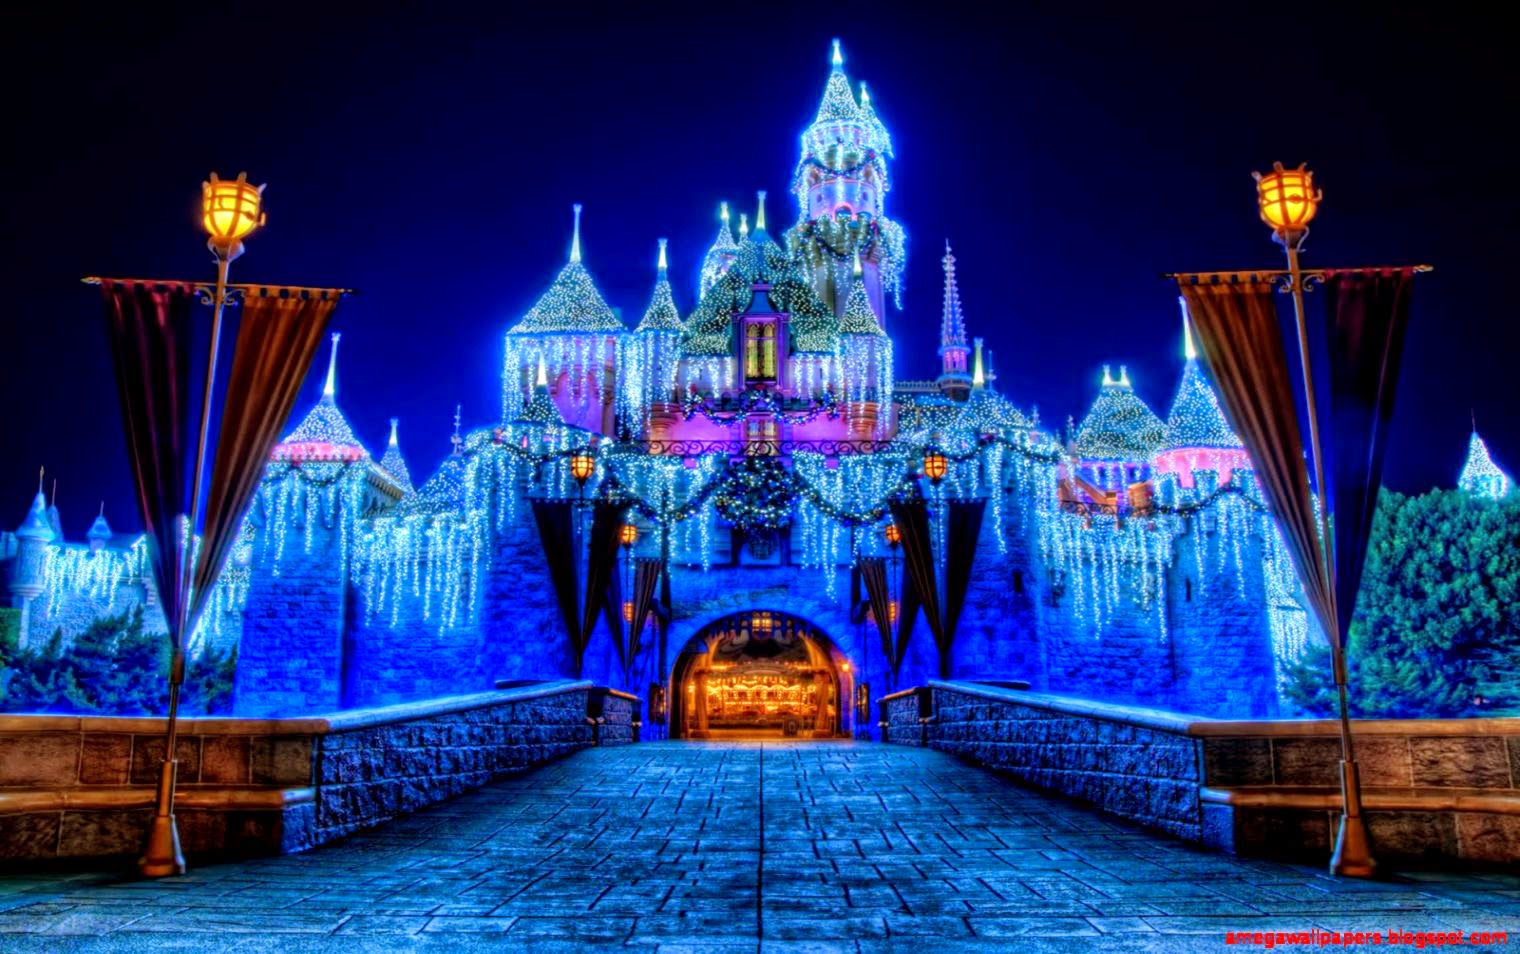 A castle that is lit up at night - Disneyland